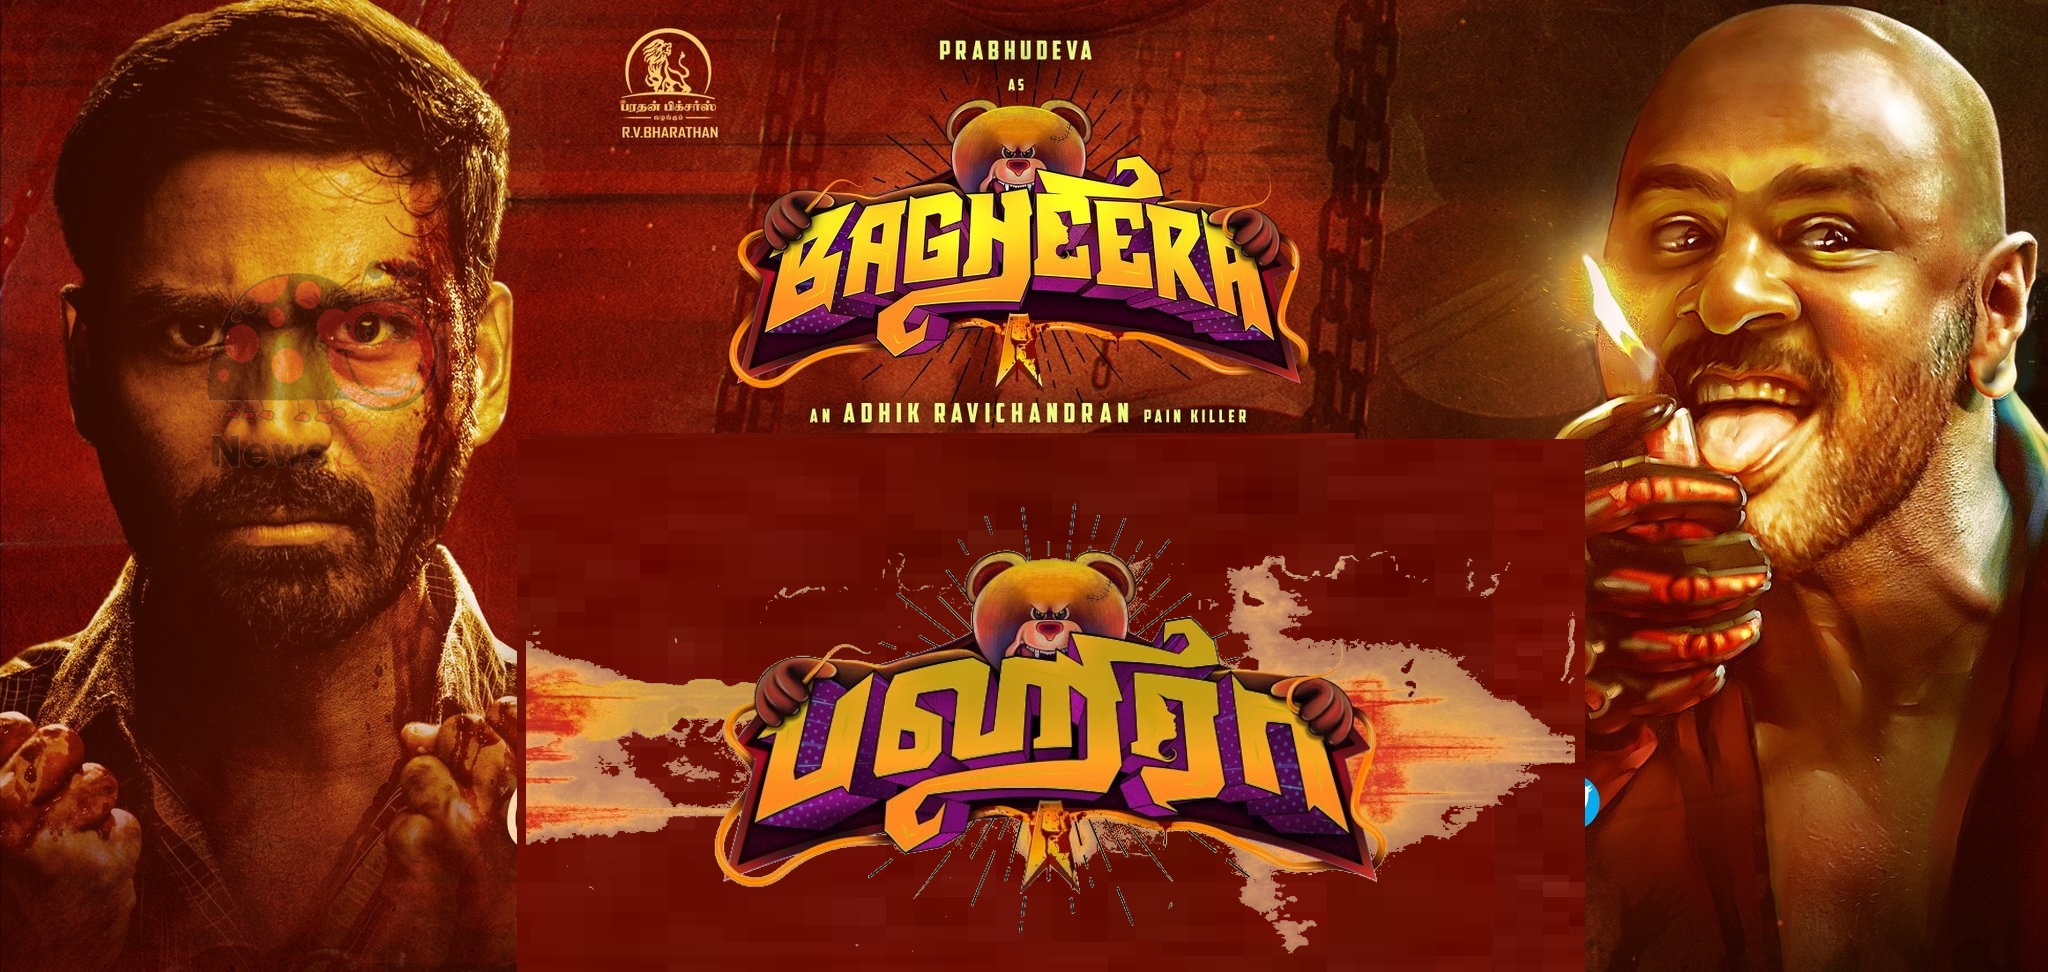 Bagheera Movie Release - Teaser and First Look Out Now